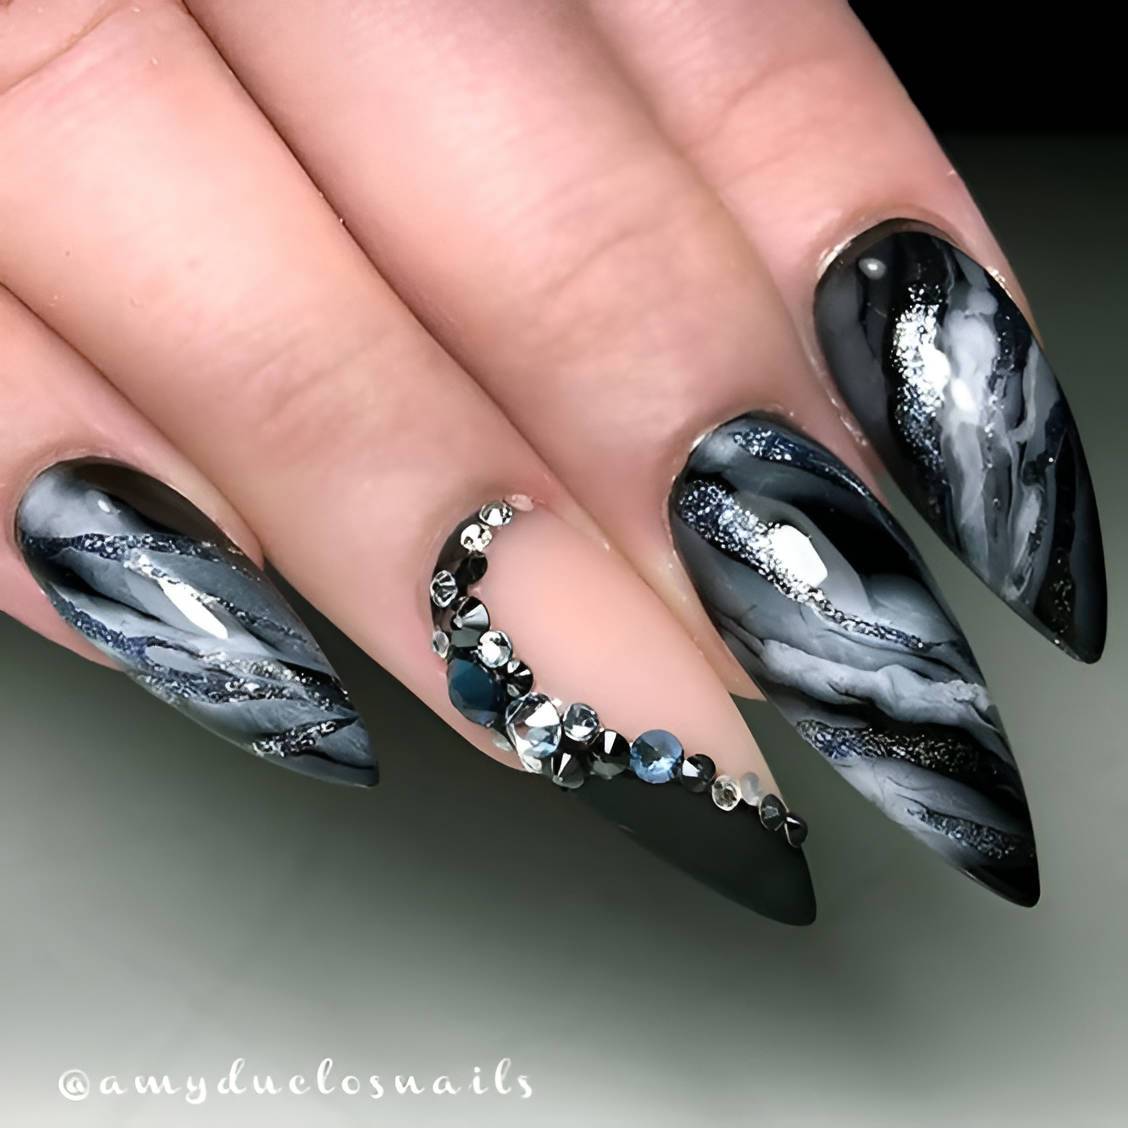 Stunning Stiletto Nail Designs Nobody Can Resist - 205